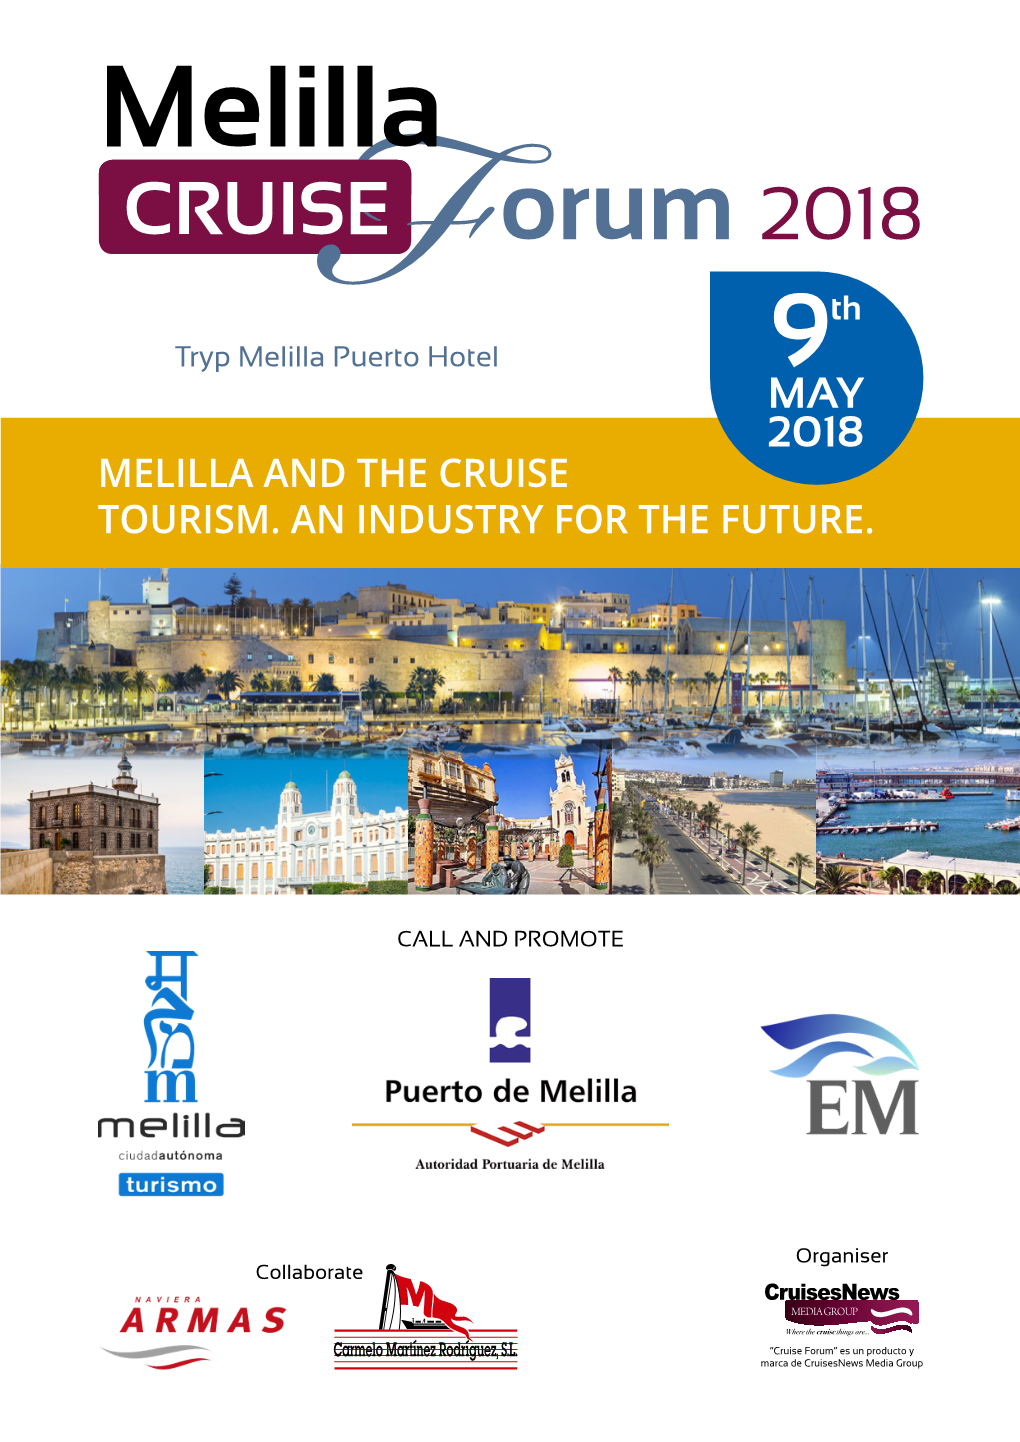 Melilla CRUISE Orum 2018 Th Tryp Melilla Puerto Hotel 9 MAY 2018 MELILLA and the CRUISE TOURISM